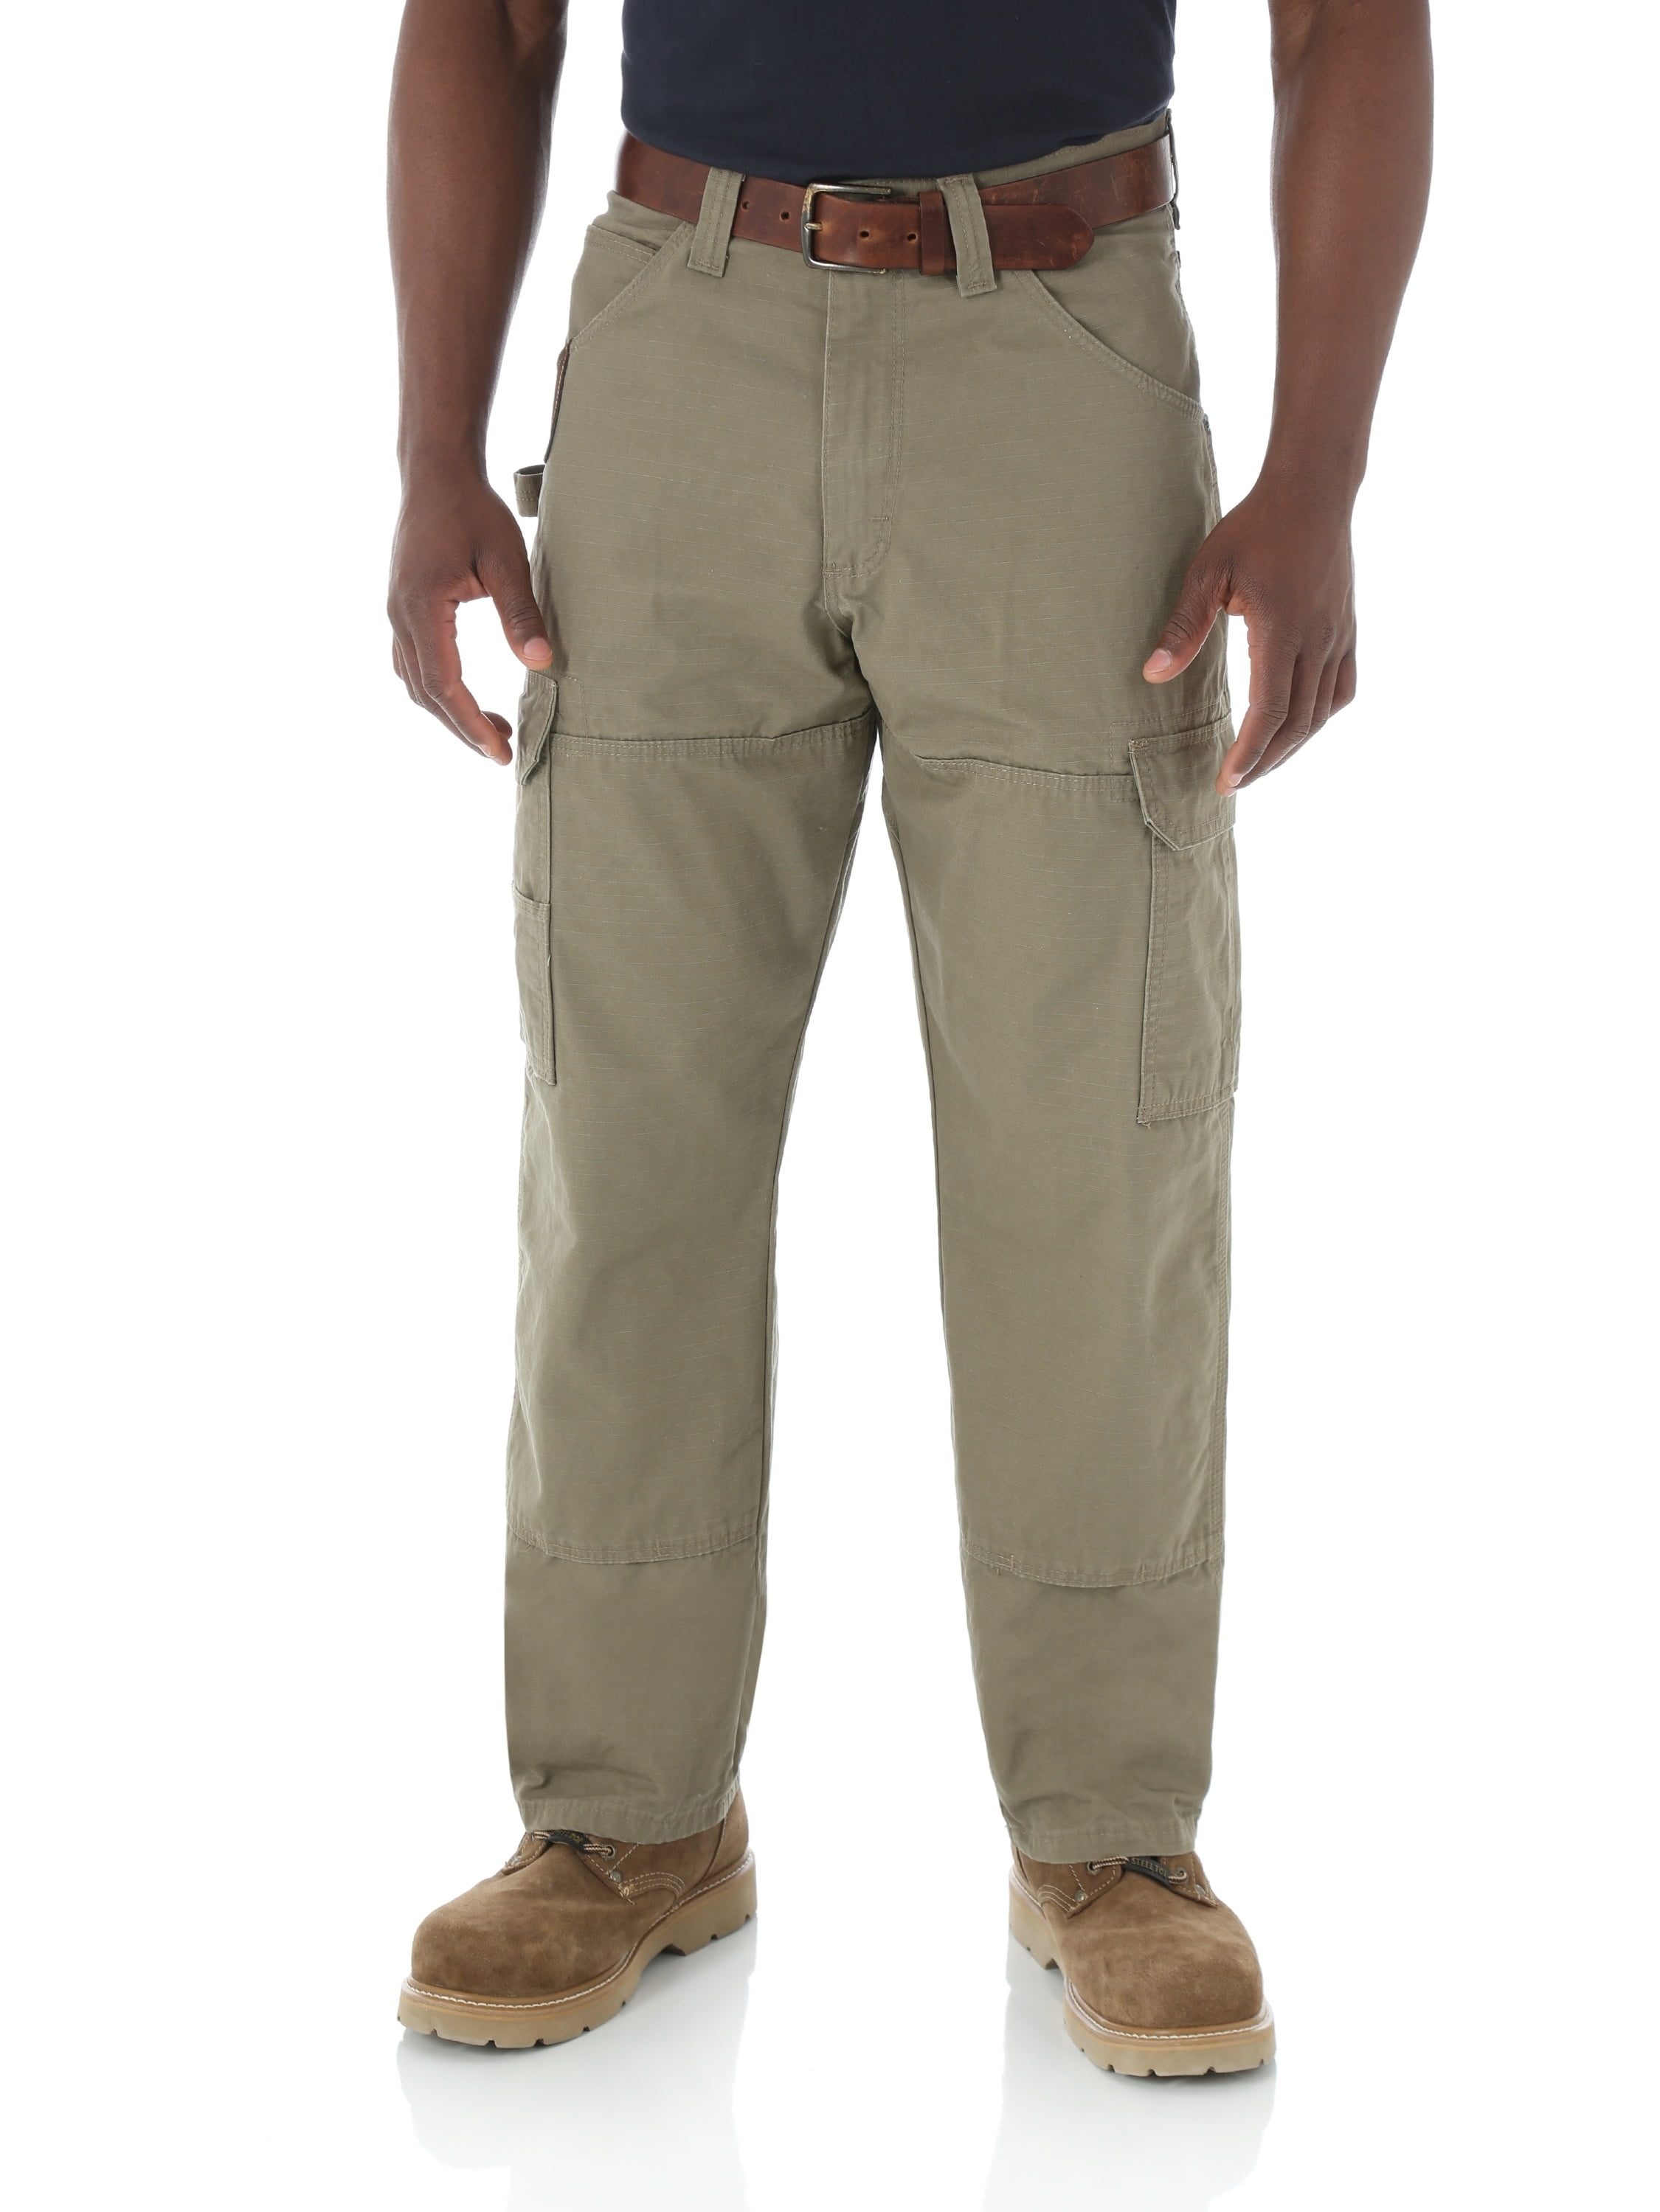 Wrangler® Men's Workwear Relaxed Fit Utility Pant with Multi Utility  Pockets, Sizes 32-44 